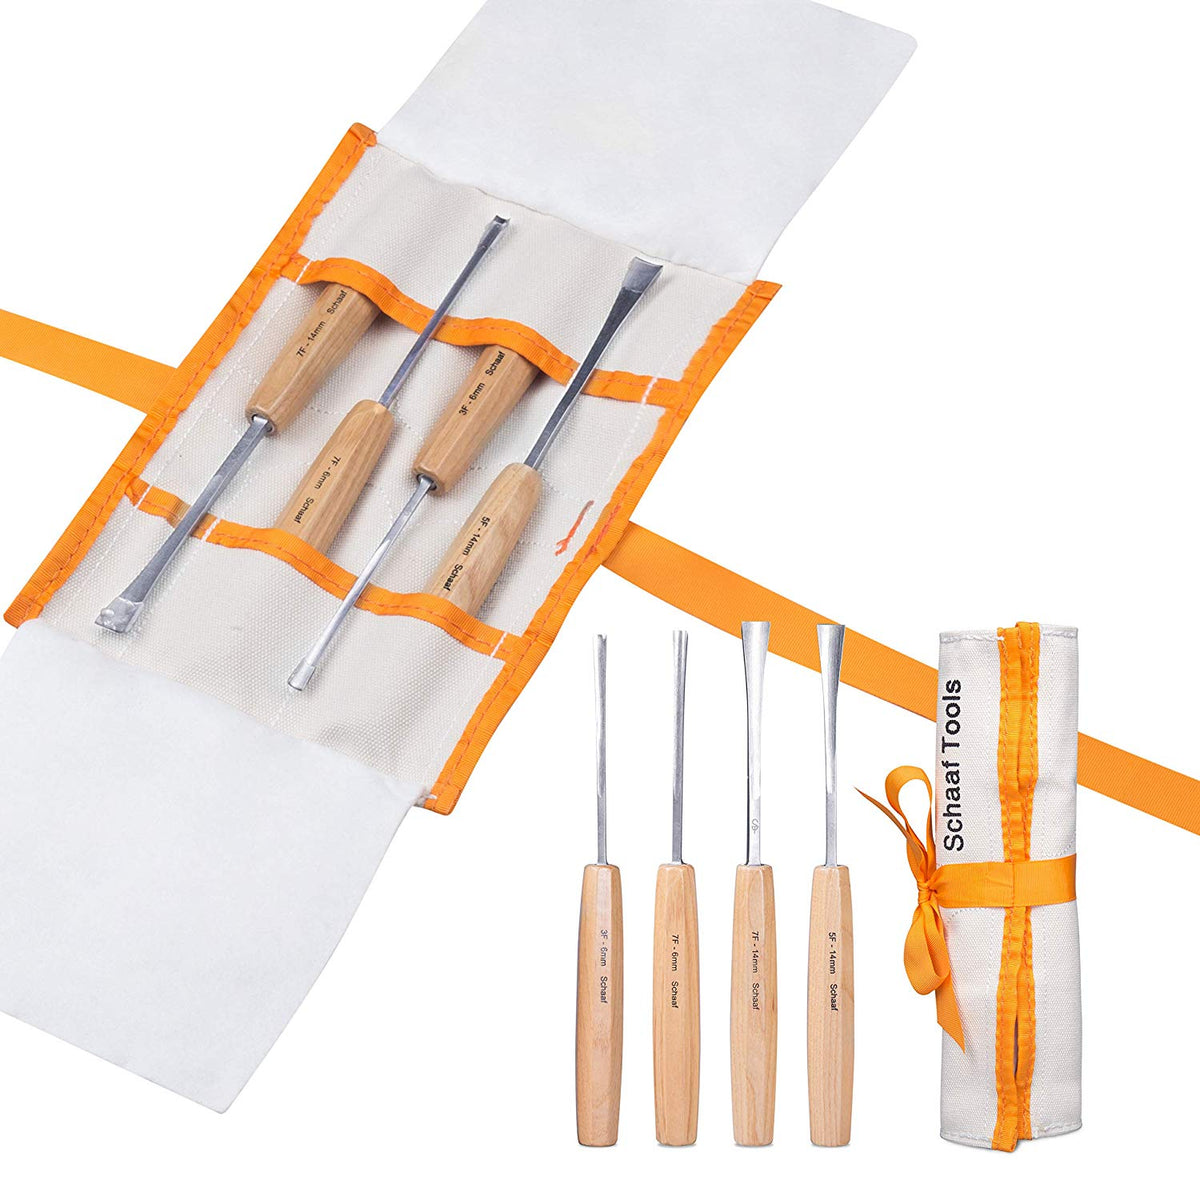 Schaaf Tools 7pc Expansion Carving Set and Schaaf Tools 12pc Foundation  Carving Set Bundle